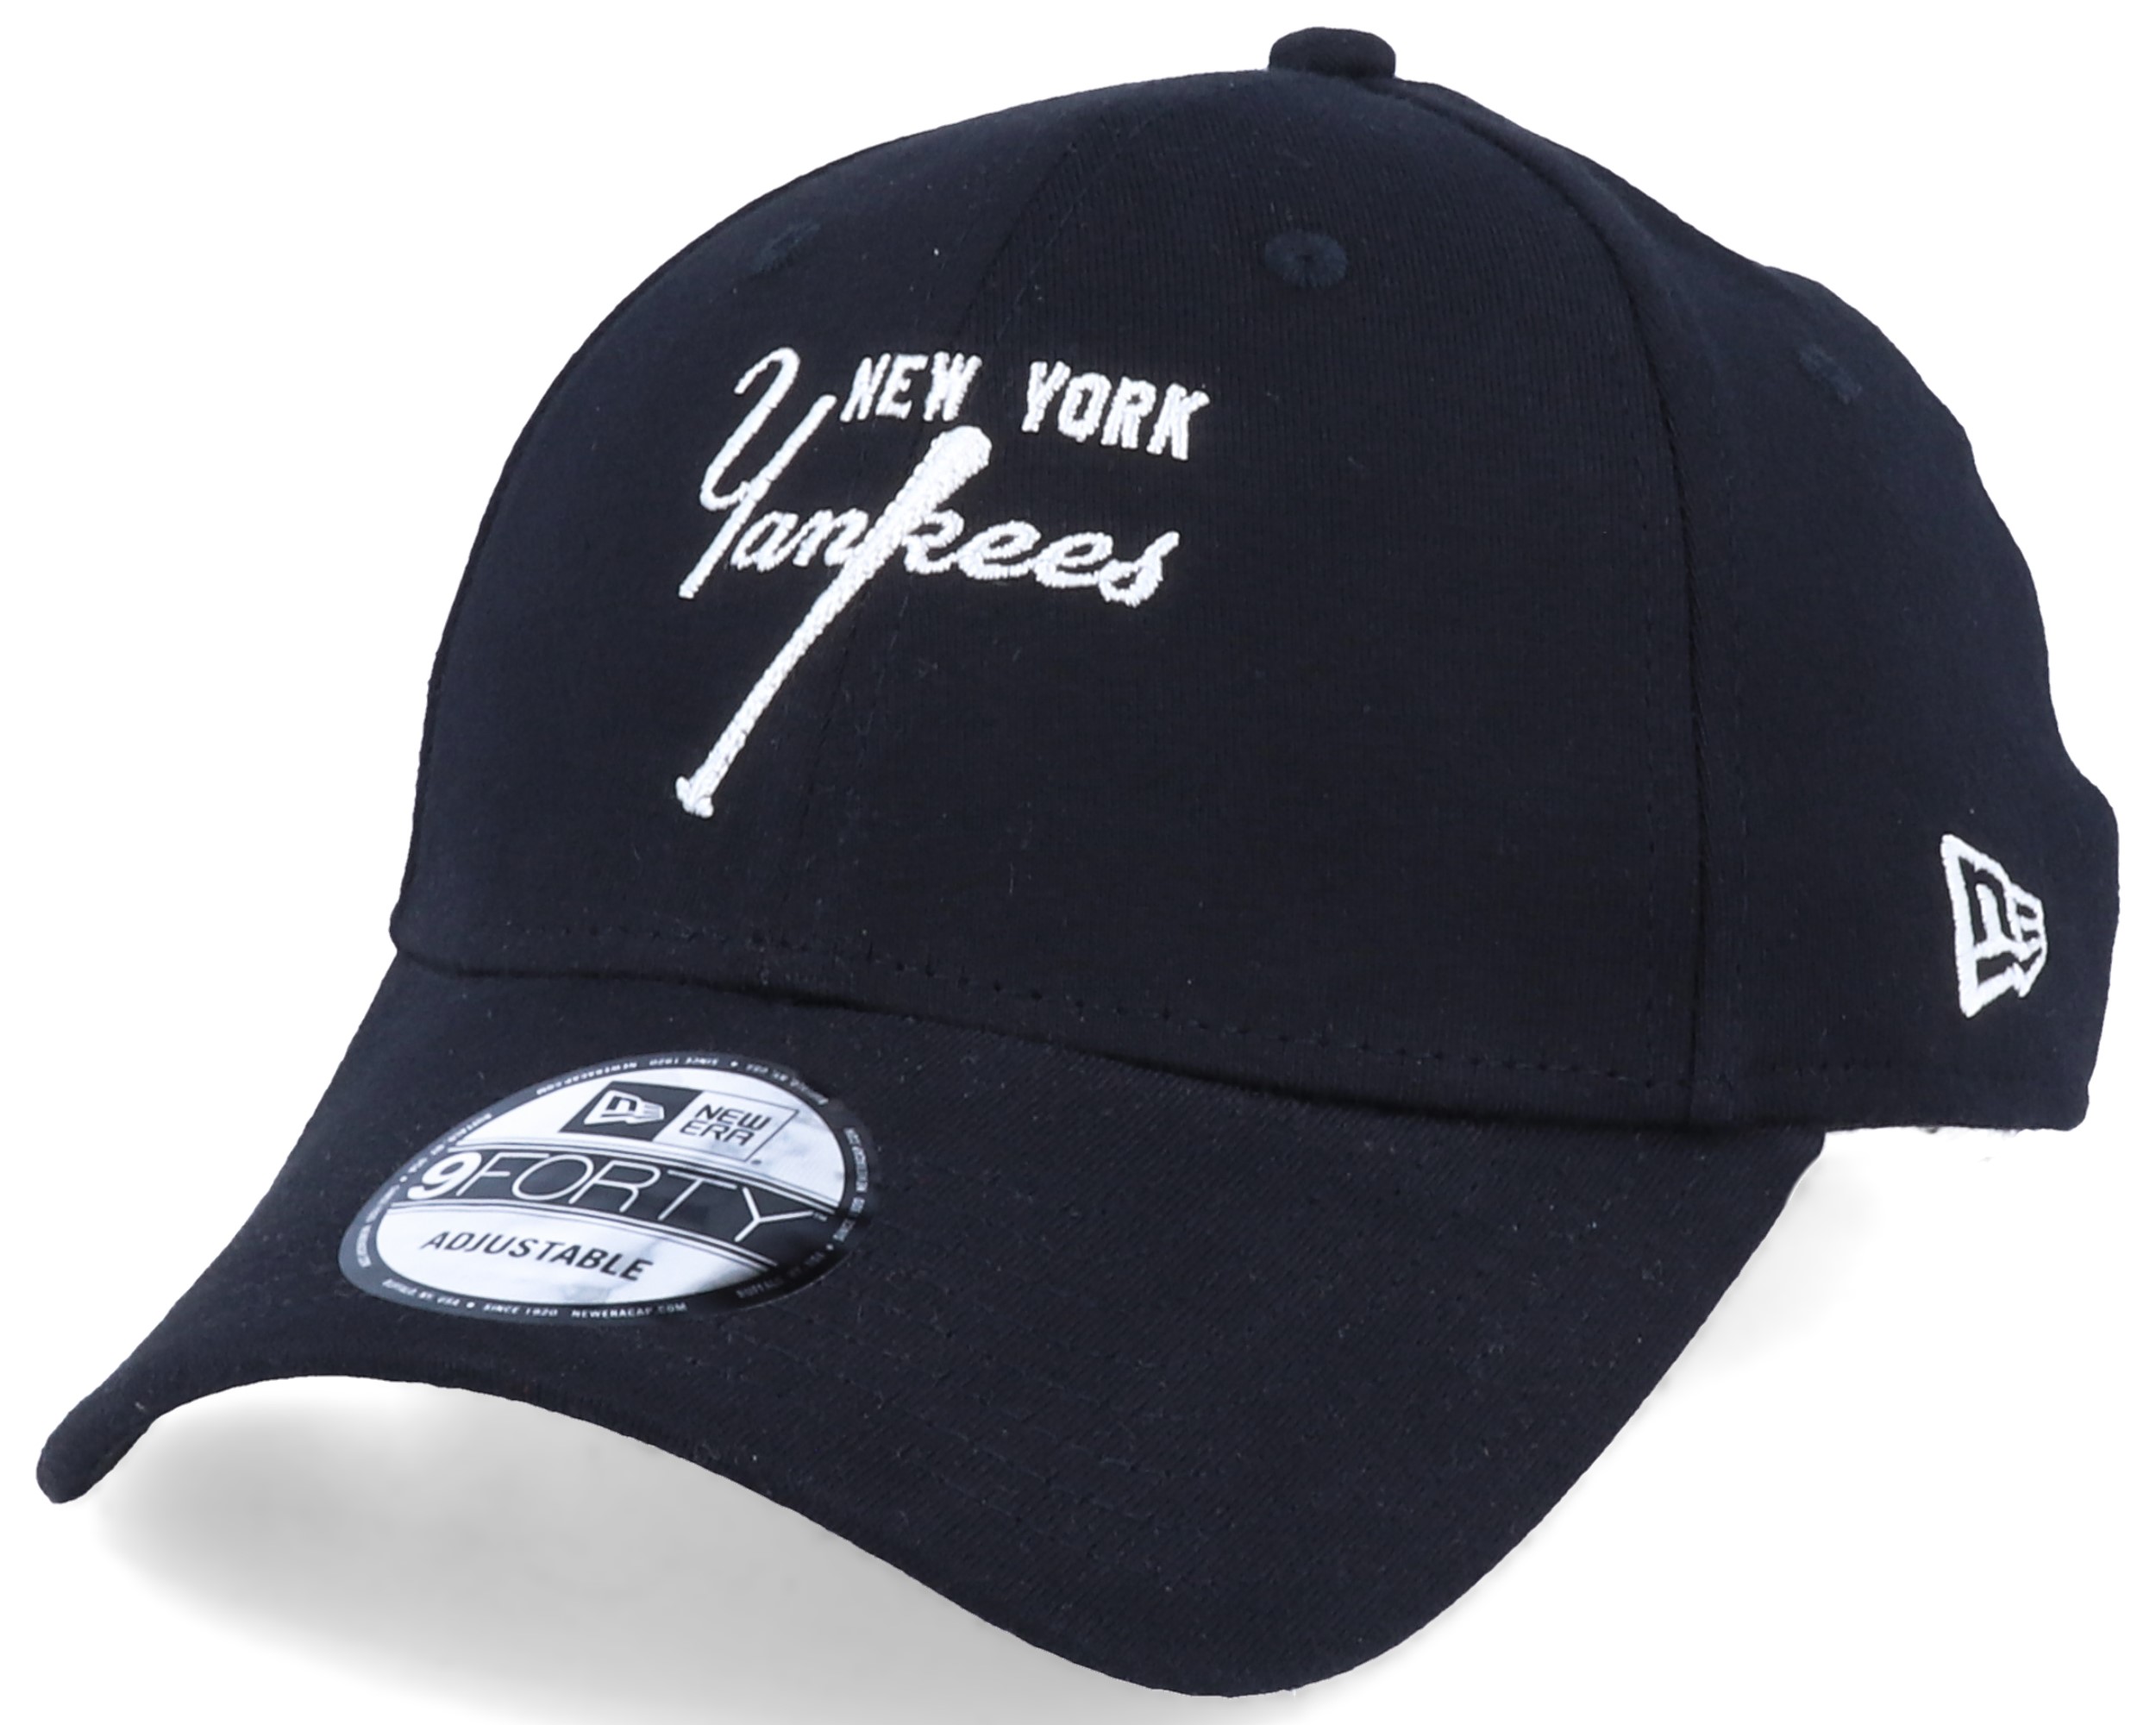 Village Hats - The classic 9FORTY New York Yankees in white from